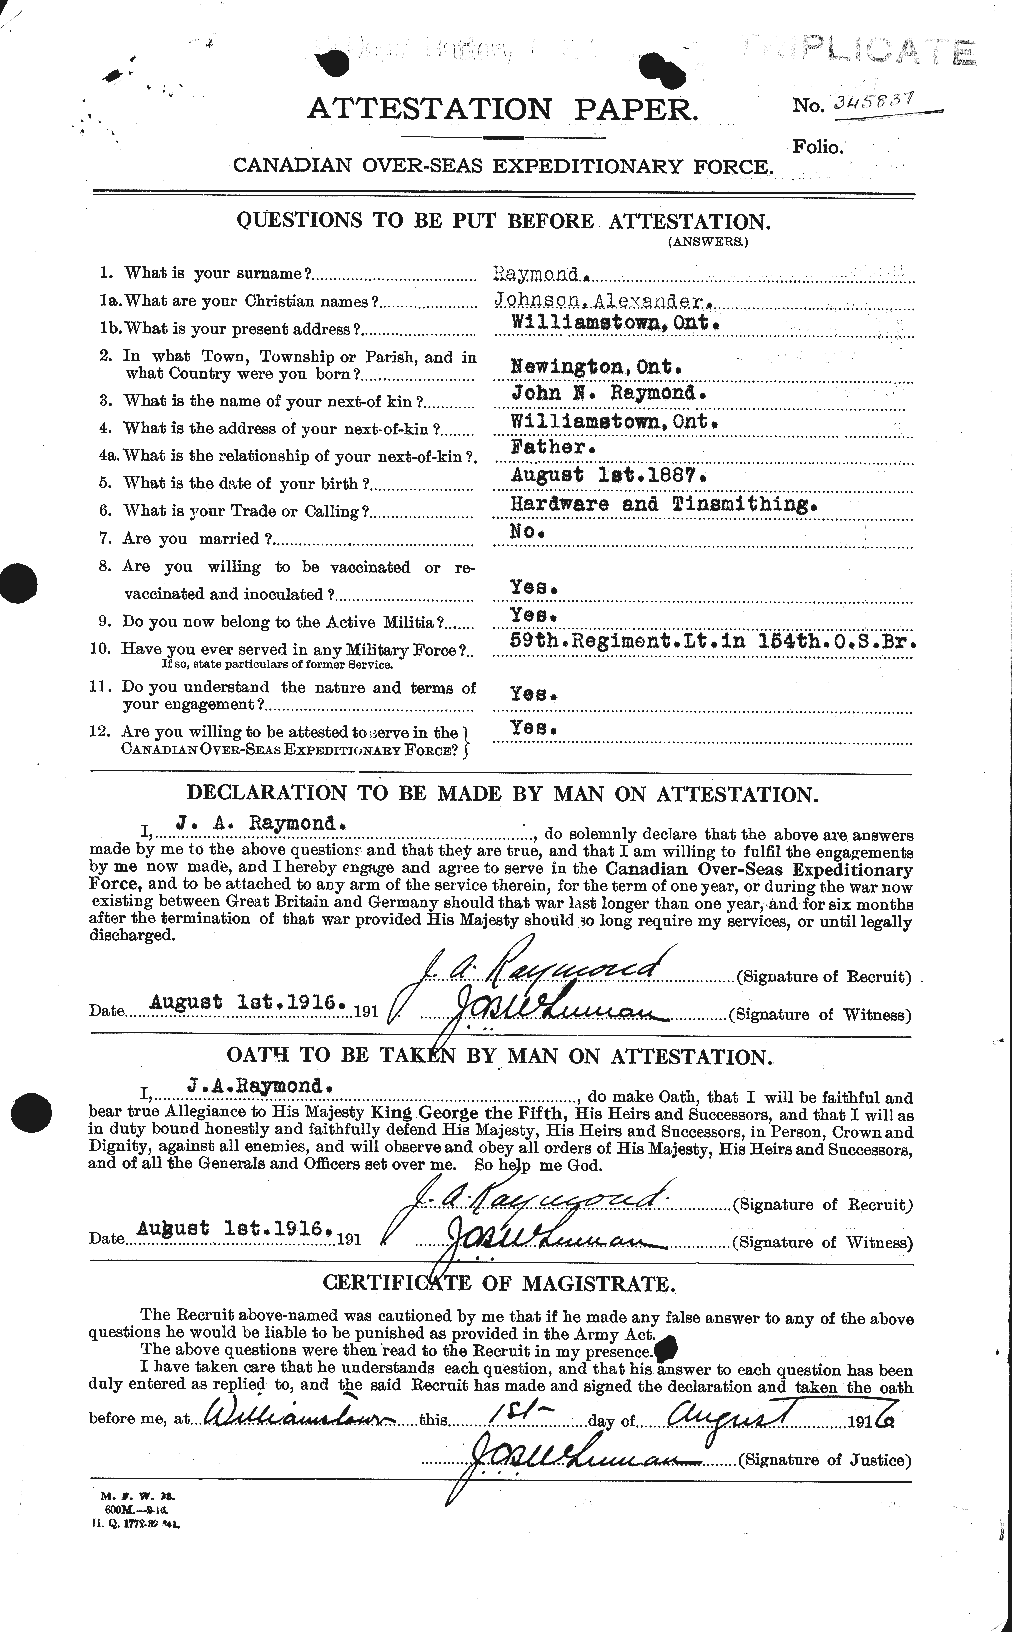 Personnel Records of the First World War - CEF 595384a